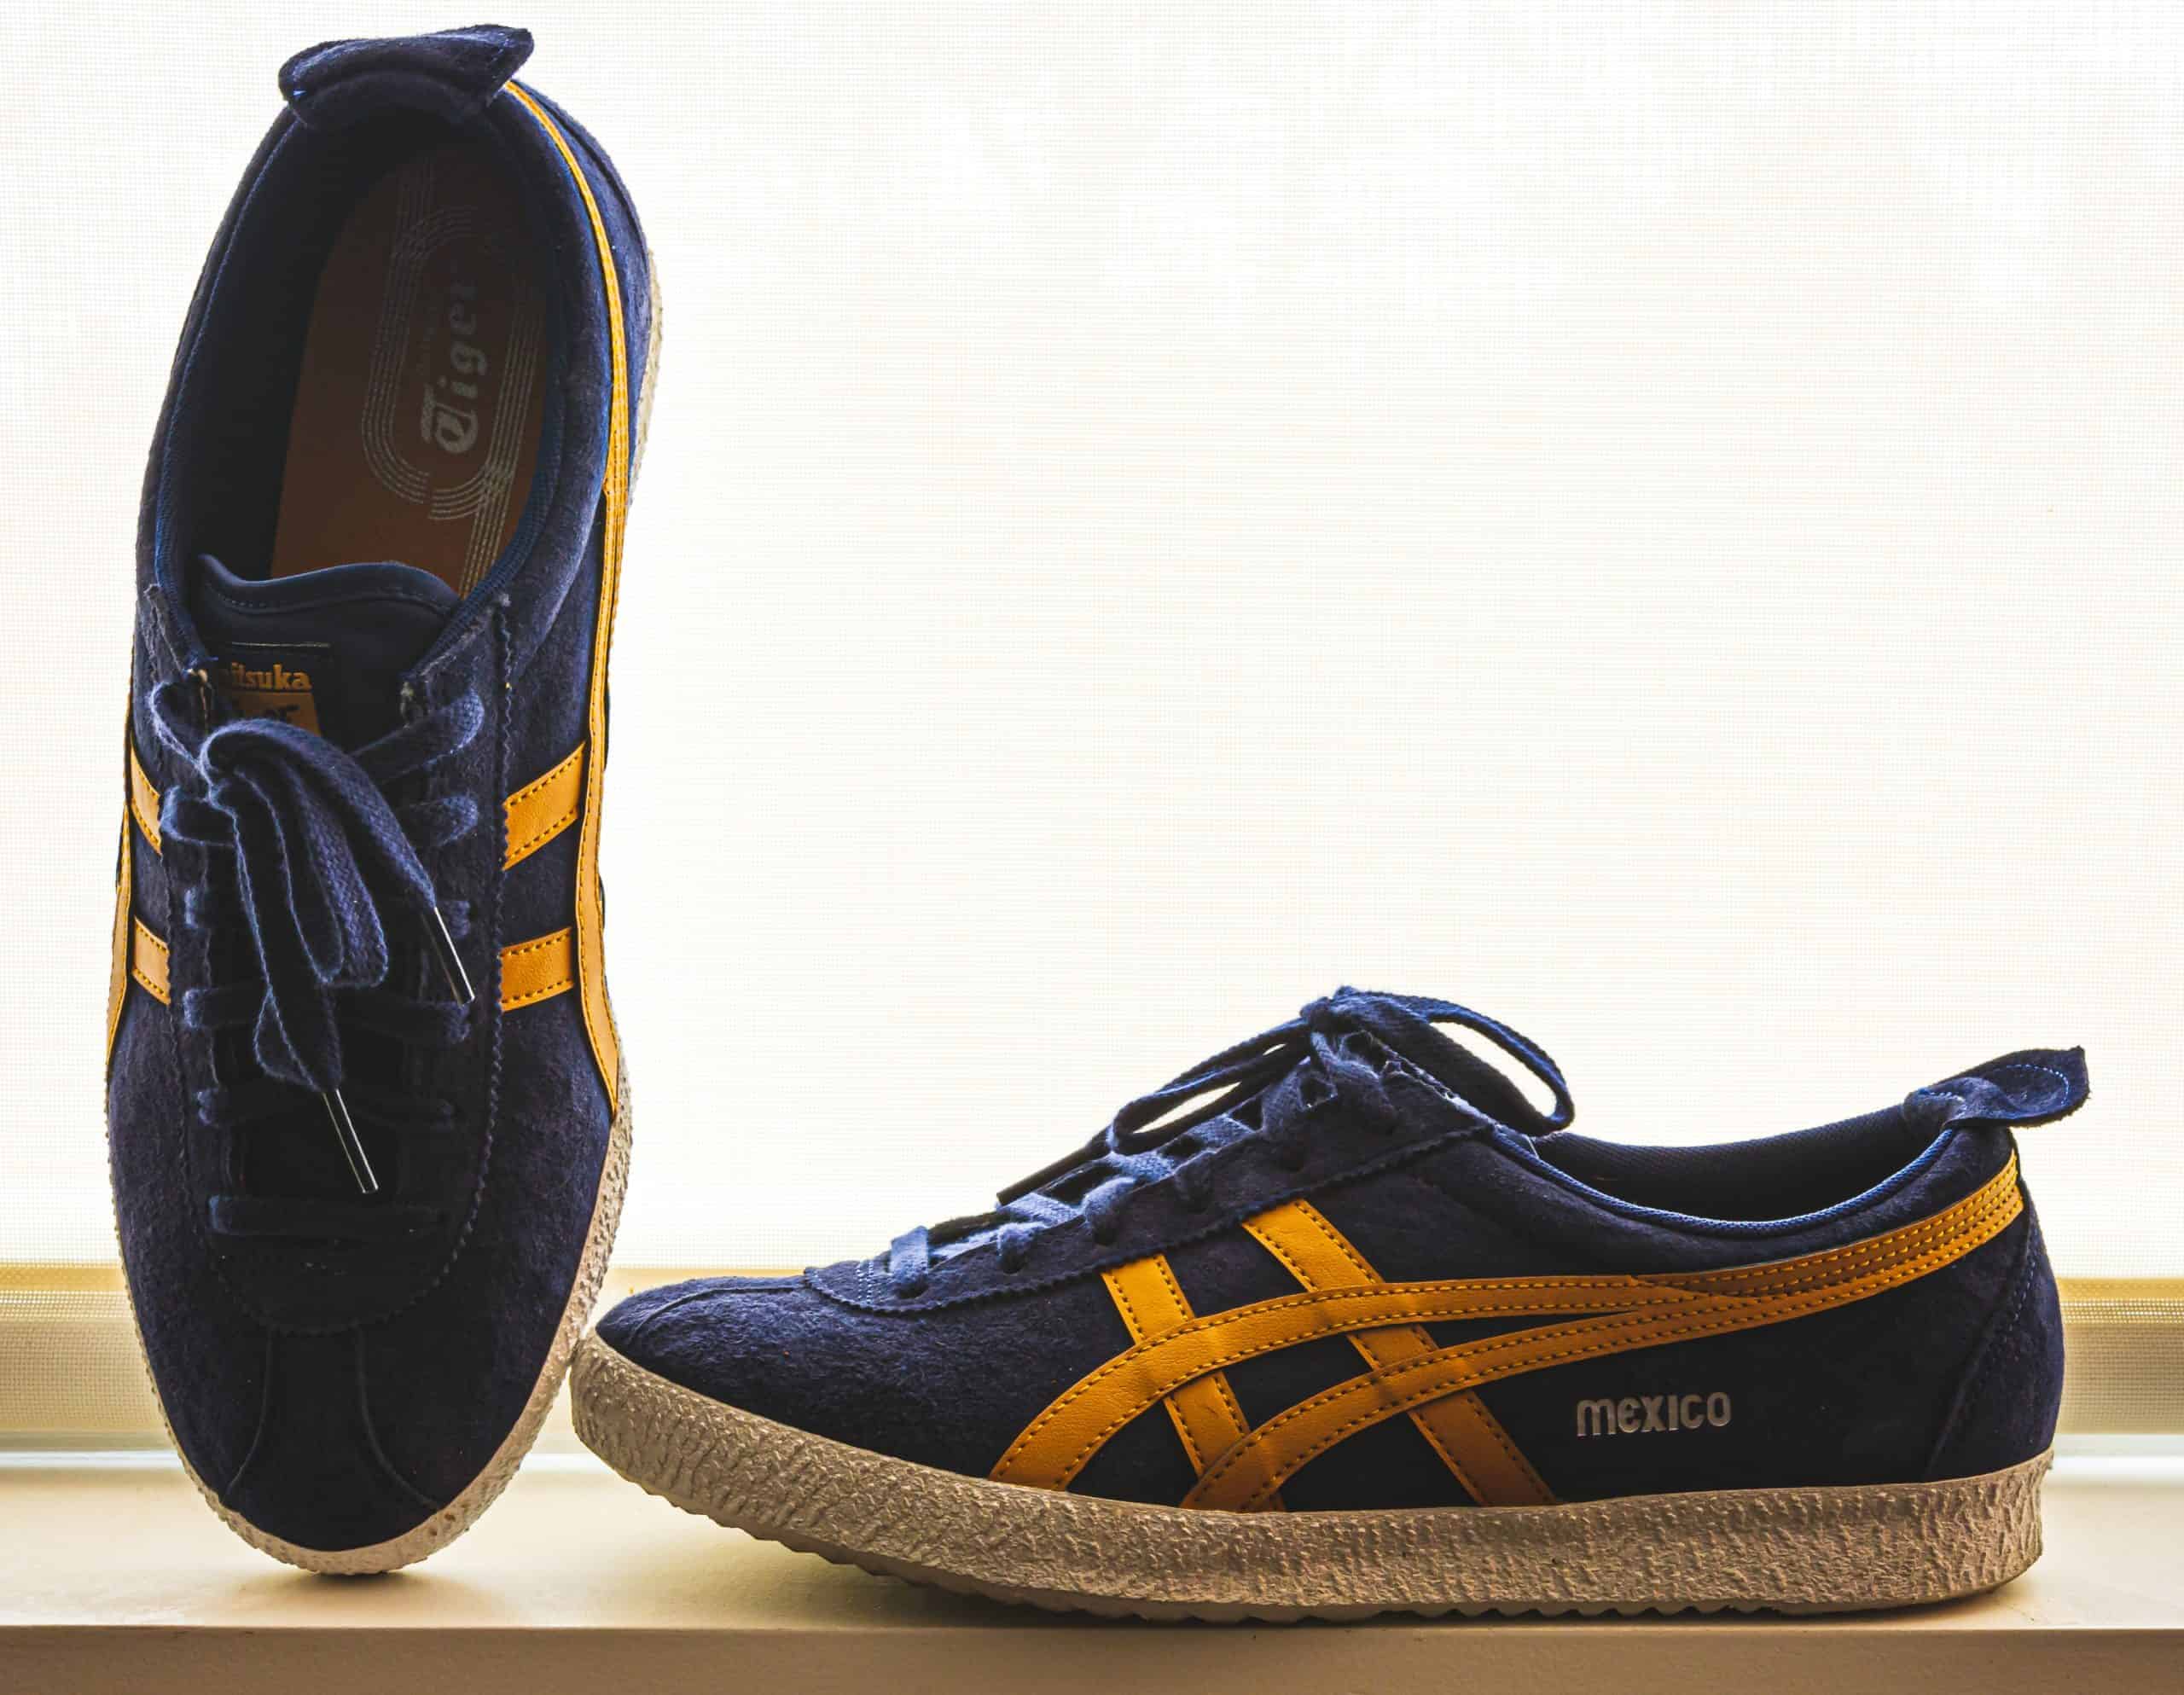 Onitsuka Tiger Japan Outlets and Latest 